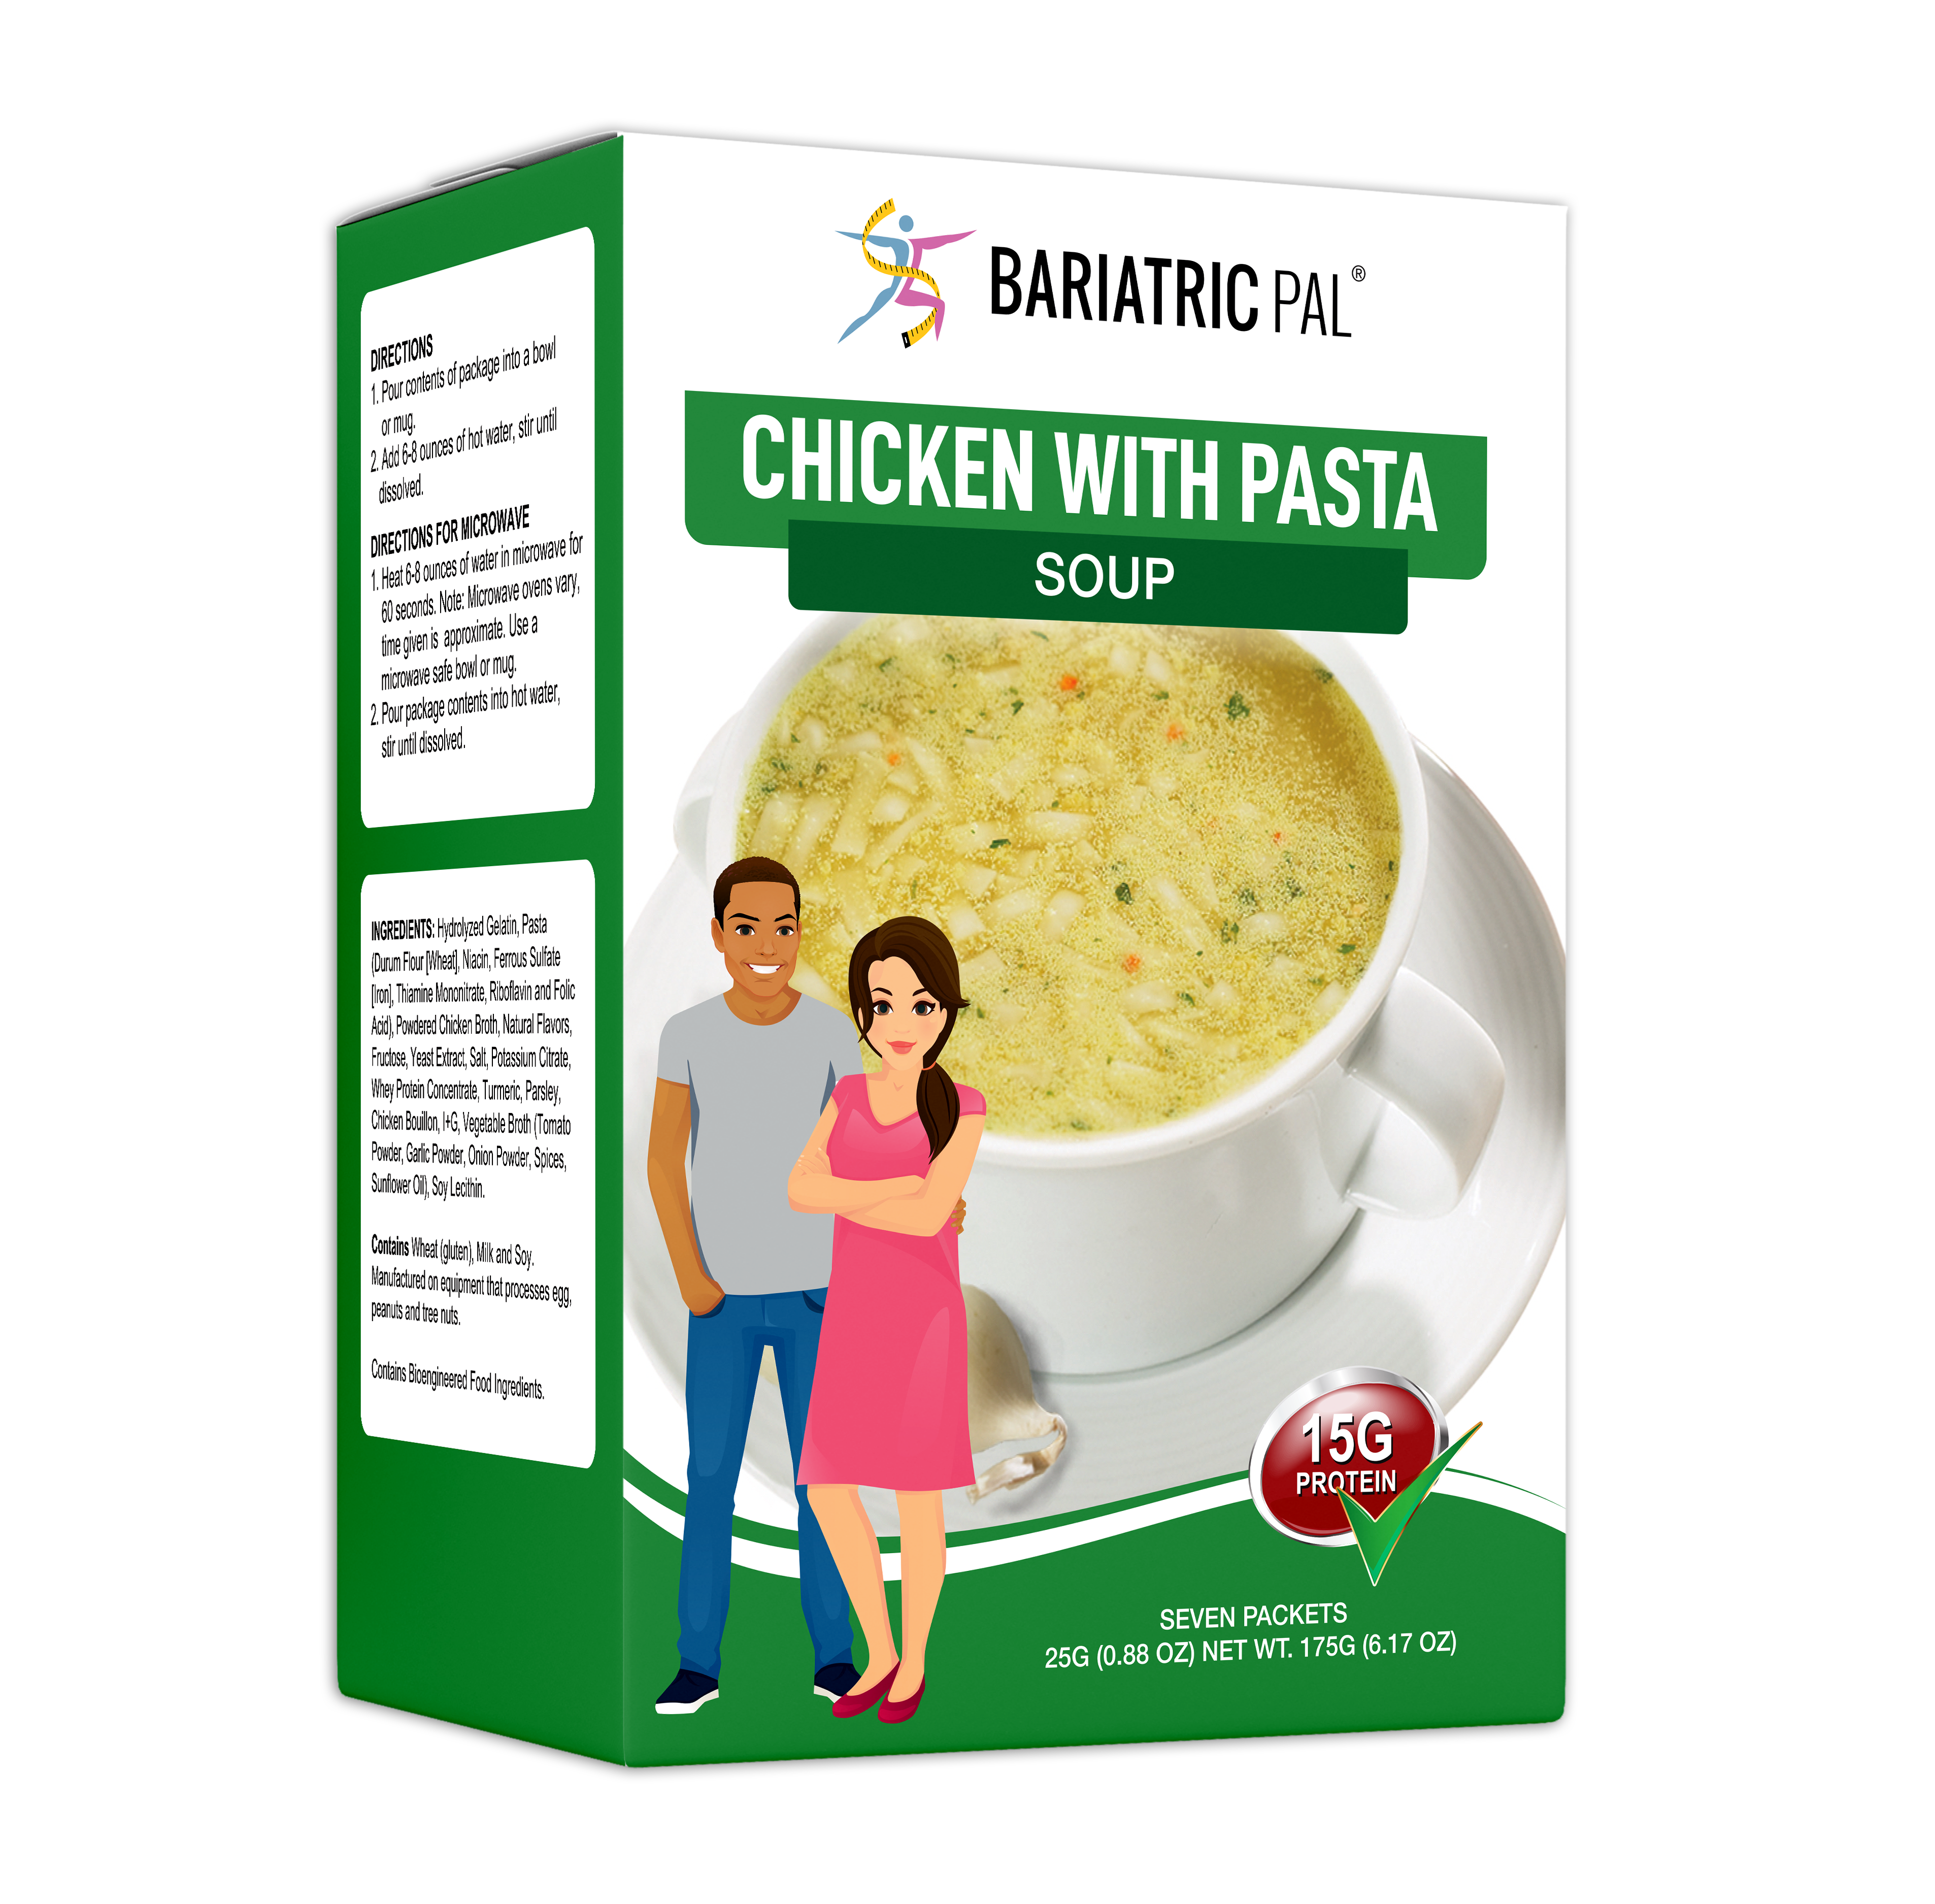 BariatricPal Protein Soup - Chicken with Pasta - High-quality Soups by BariatricPal at 